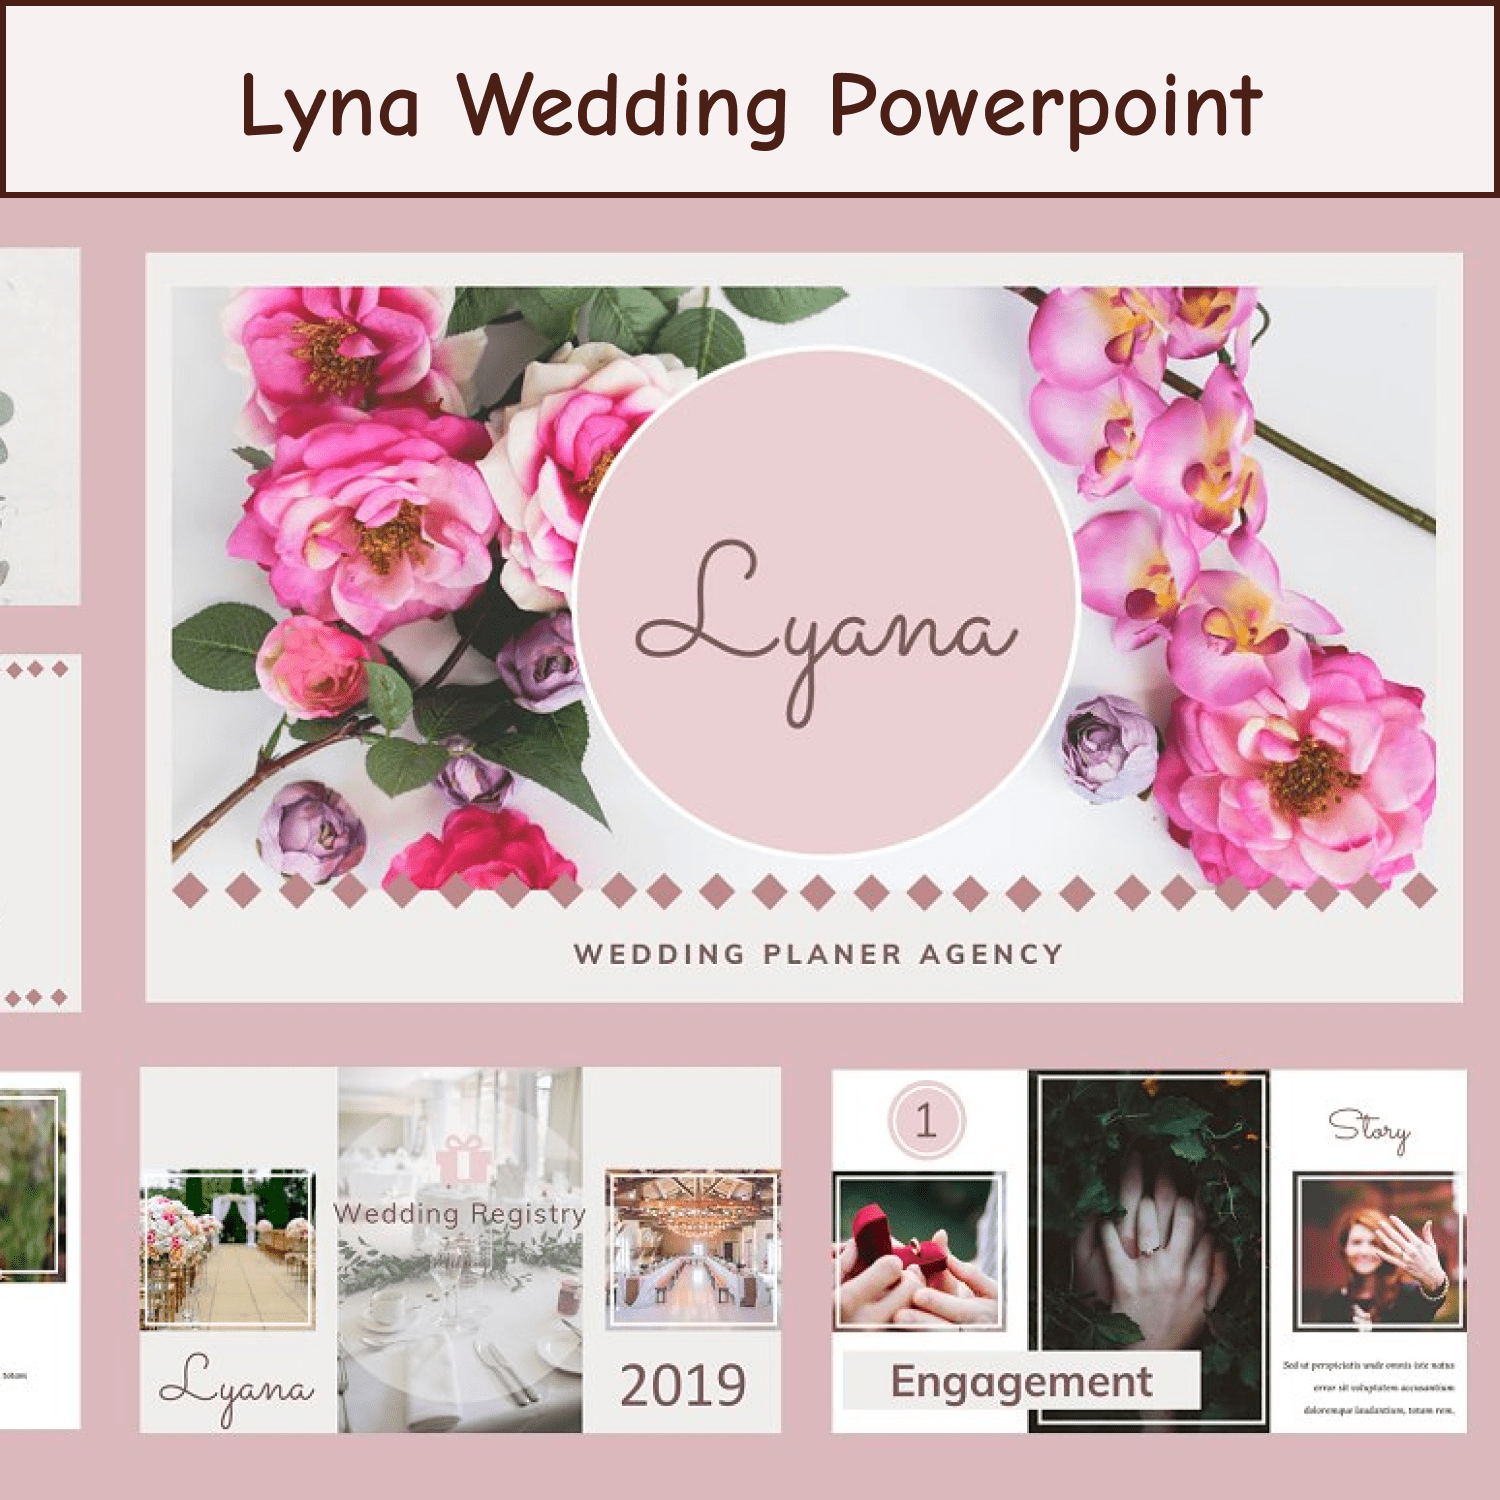 Lyna Wedding Powerpoint cover.